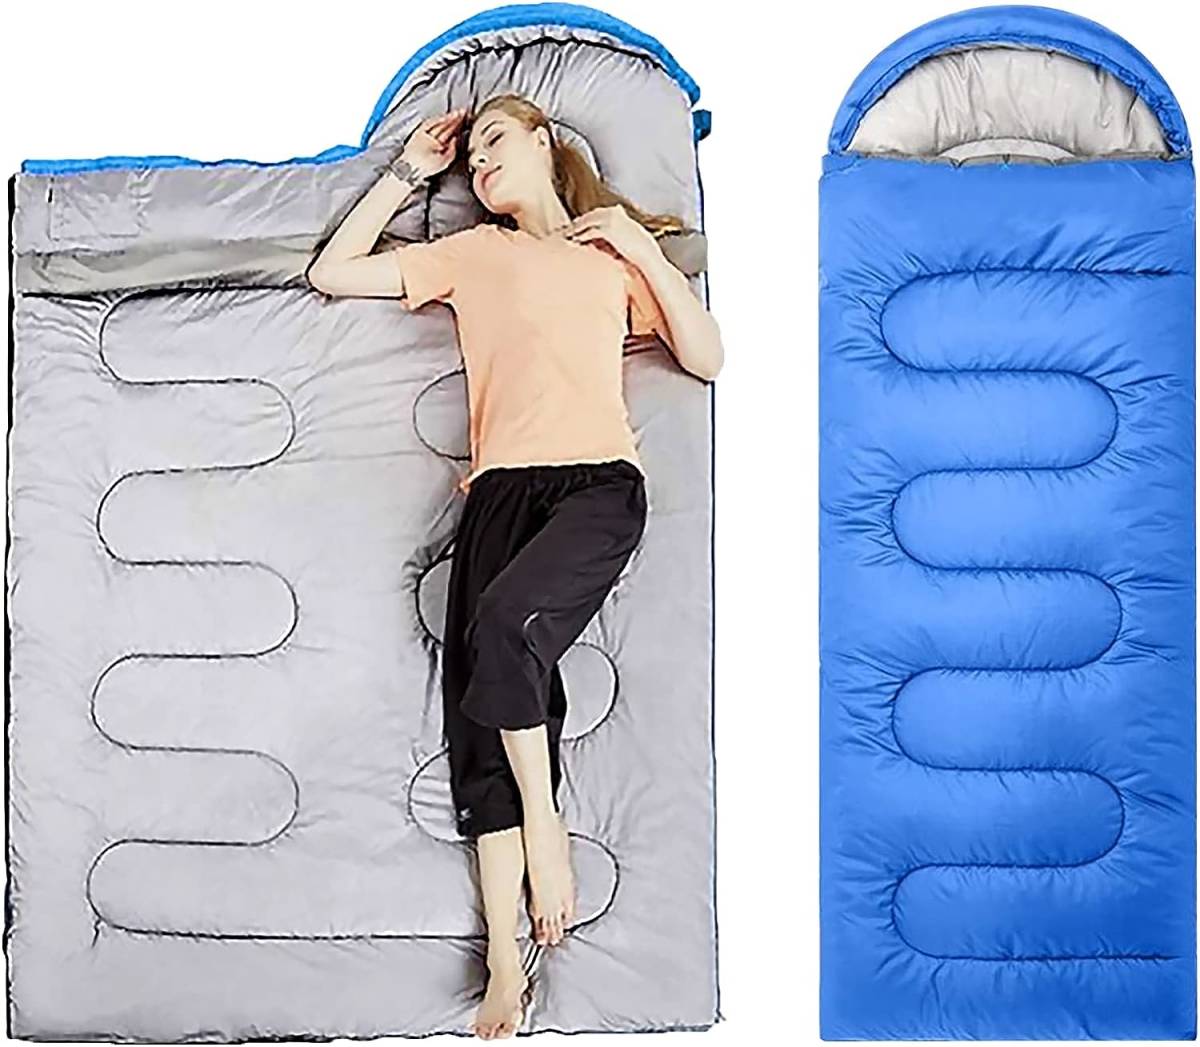 [ blue ] envelope type sleeping bag camp sleeping bag light weight mountain climbing outdoors sleeping bag sleeping area in the vehicle protection against cold .... cushion waterproof mattress house for . customer for sleeping bag 